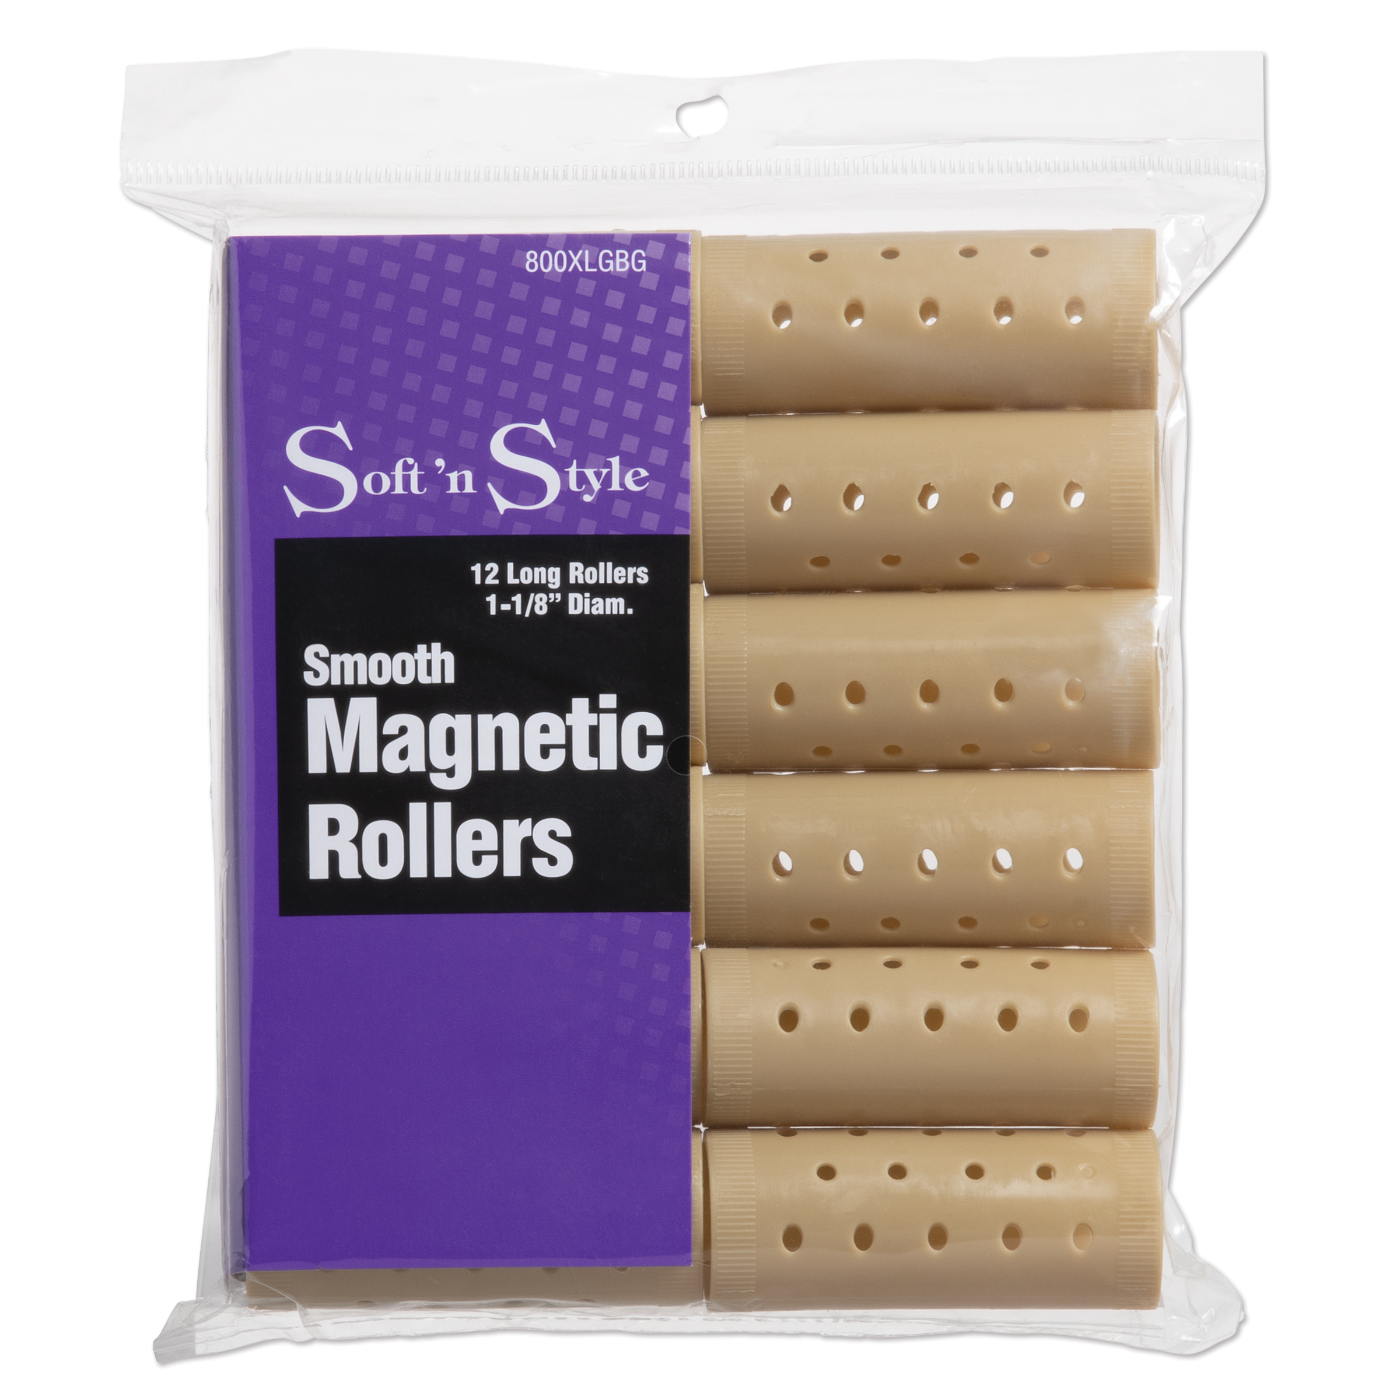 Smooth Magnetic Rollers, Long Beige - 1-1/8"